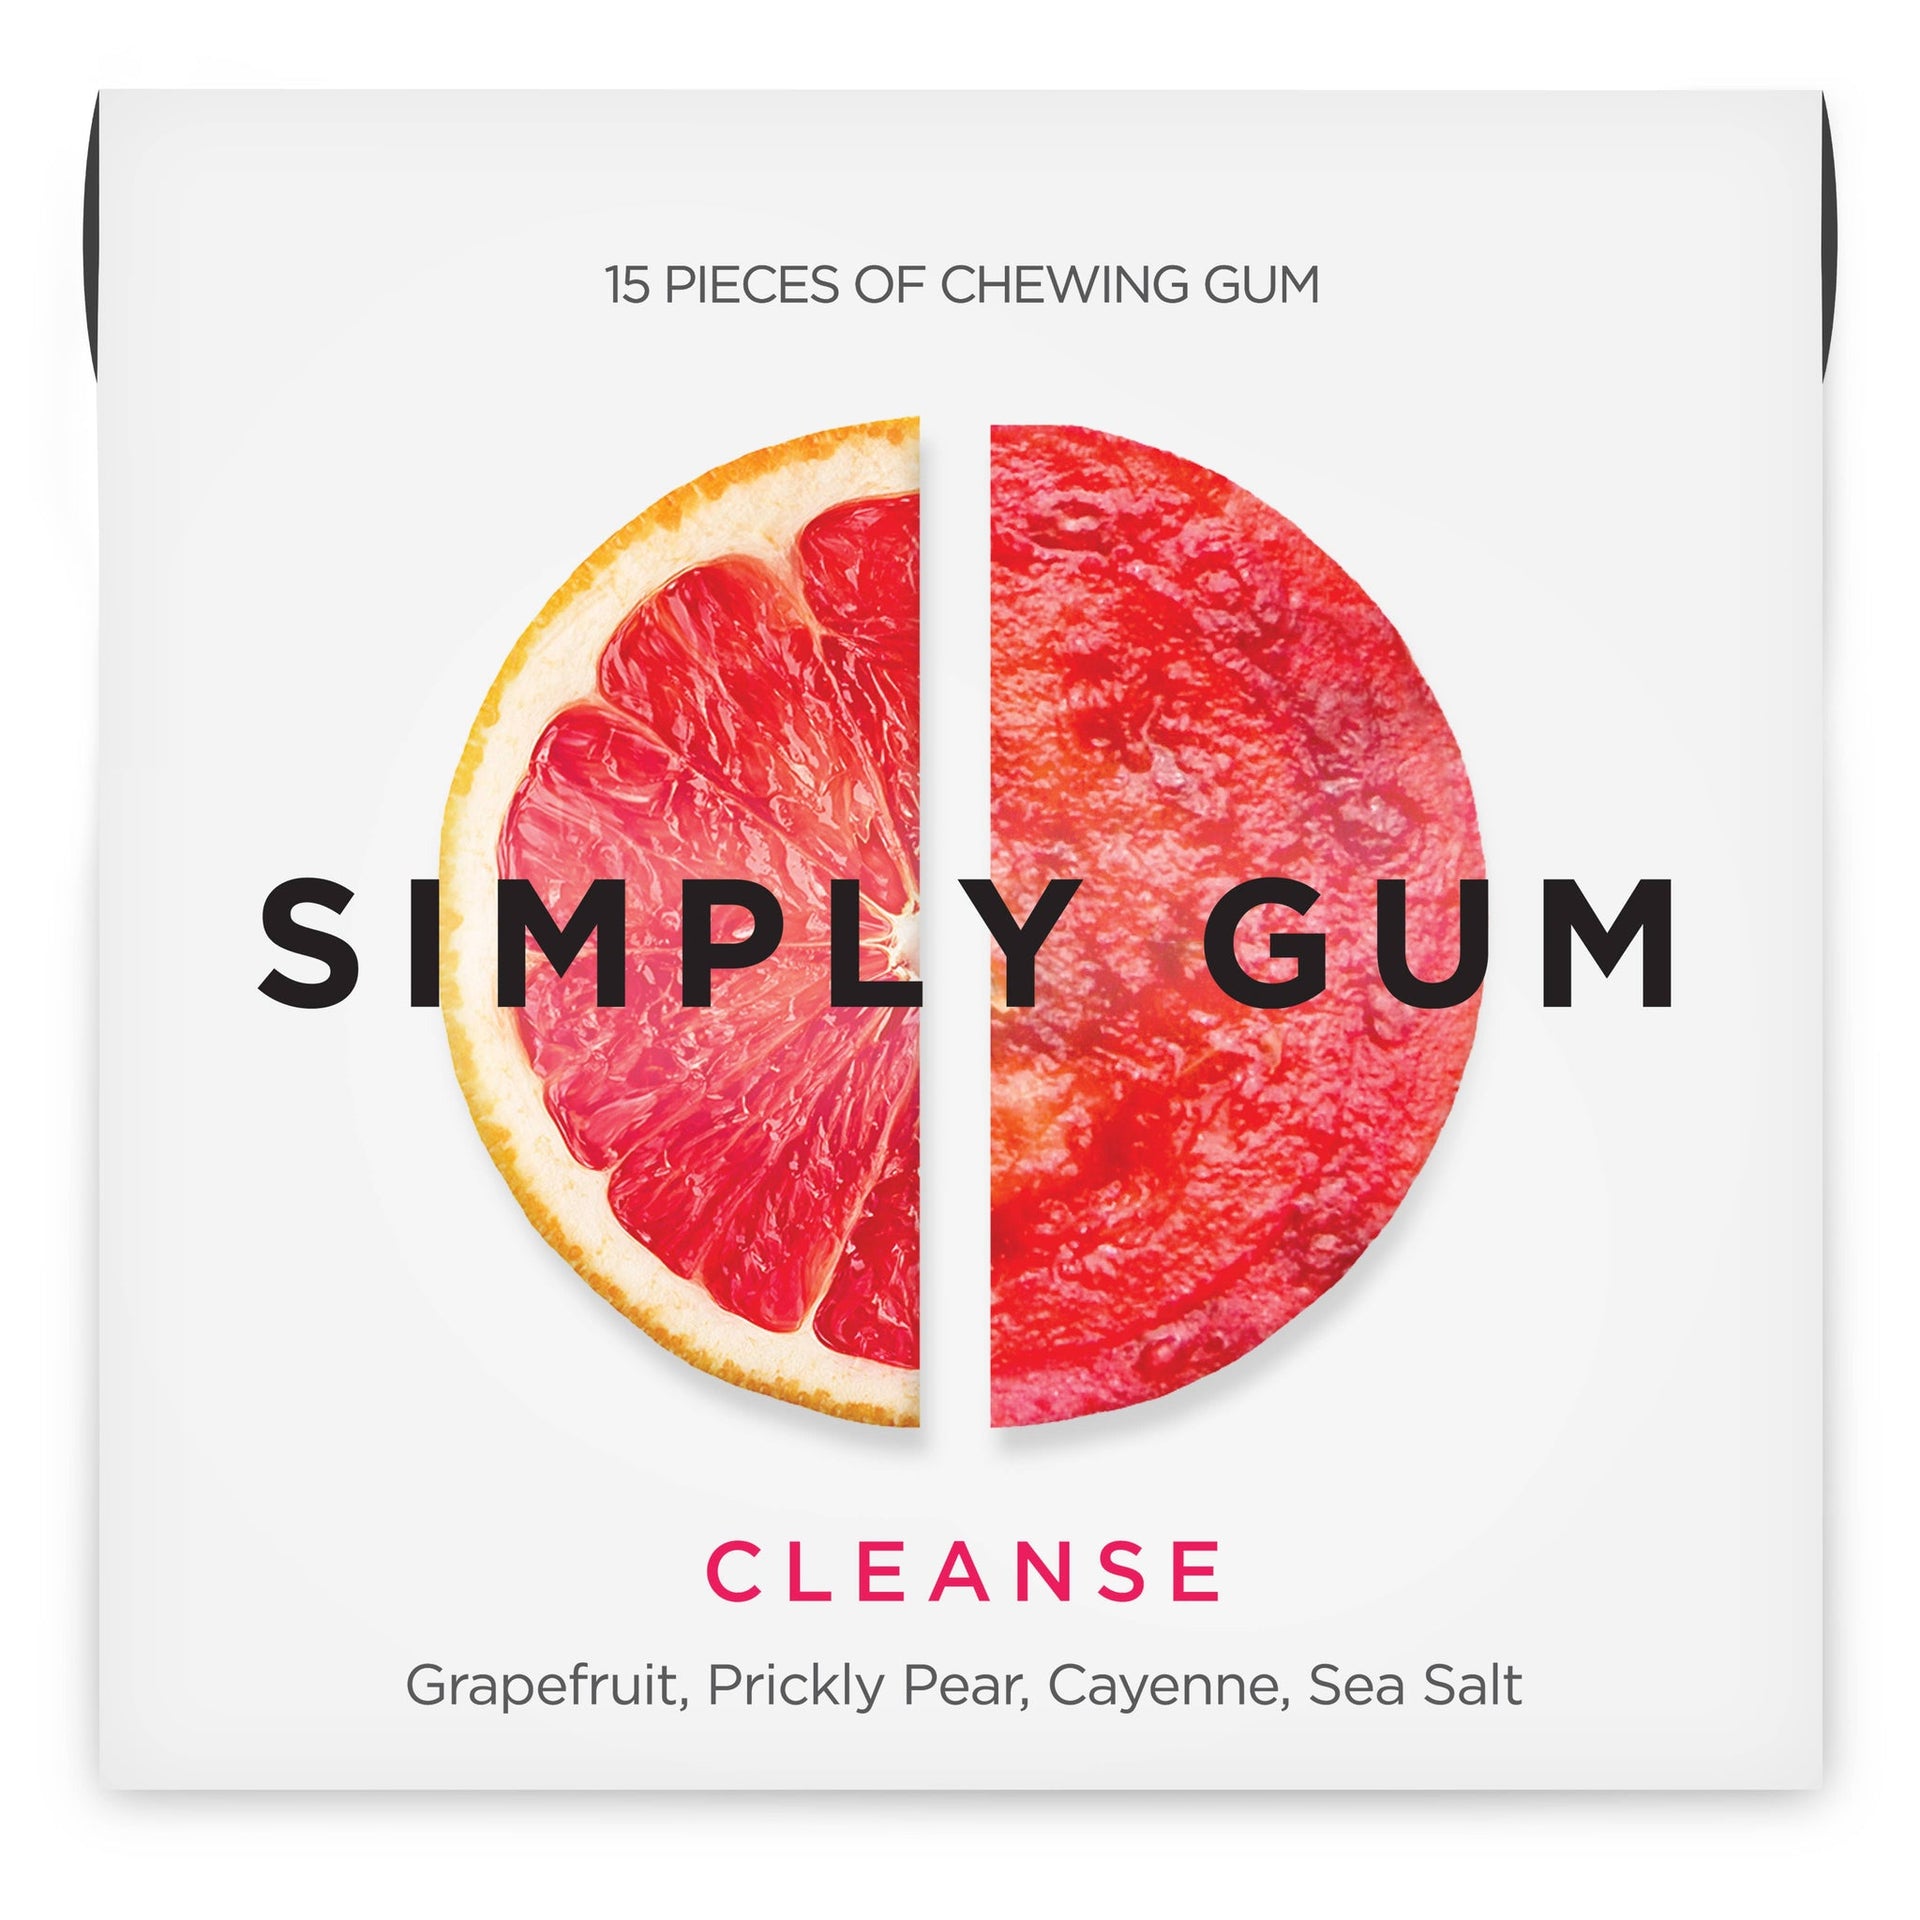 Simply Gum - Natural Chewing Gum